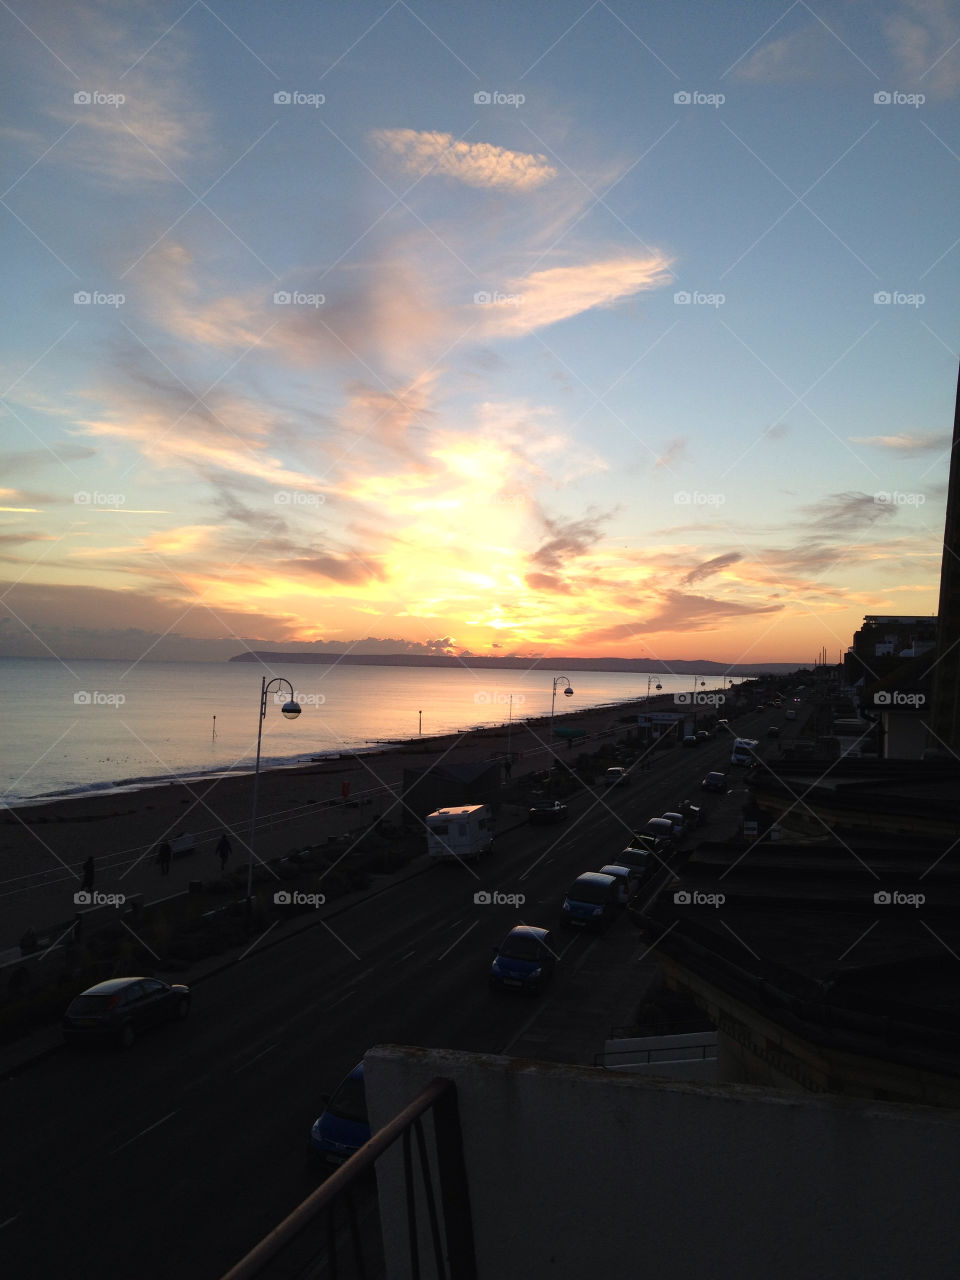 sunset lovely bexhill on sea by flybye